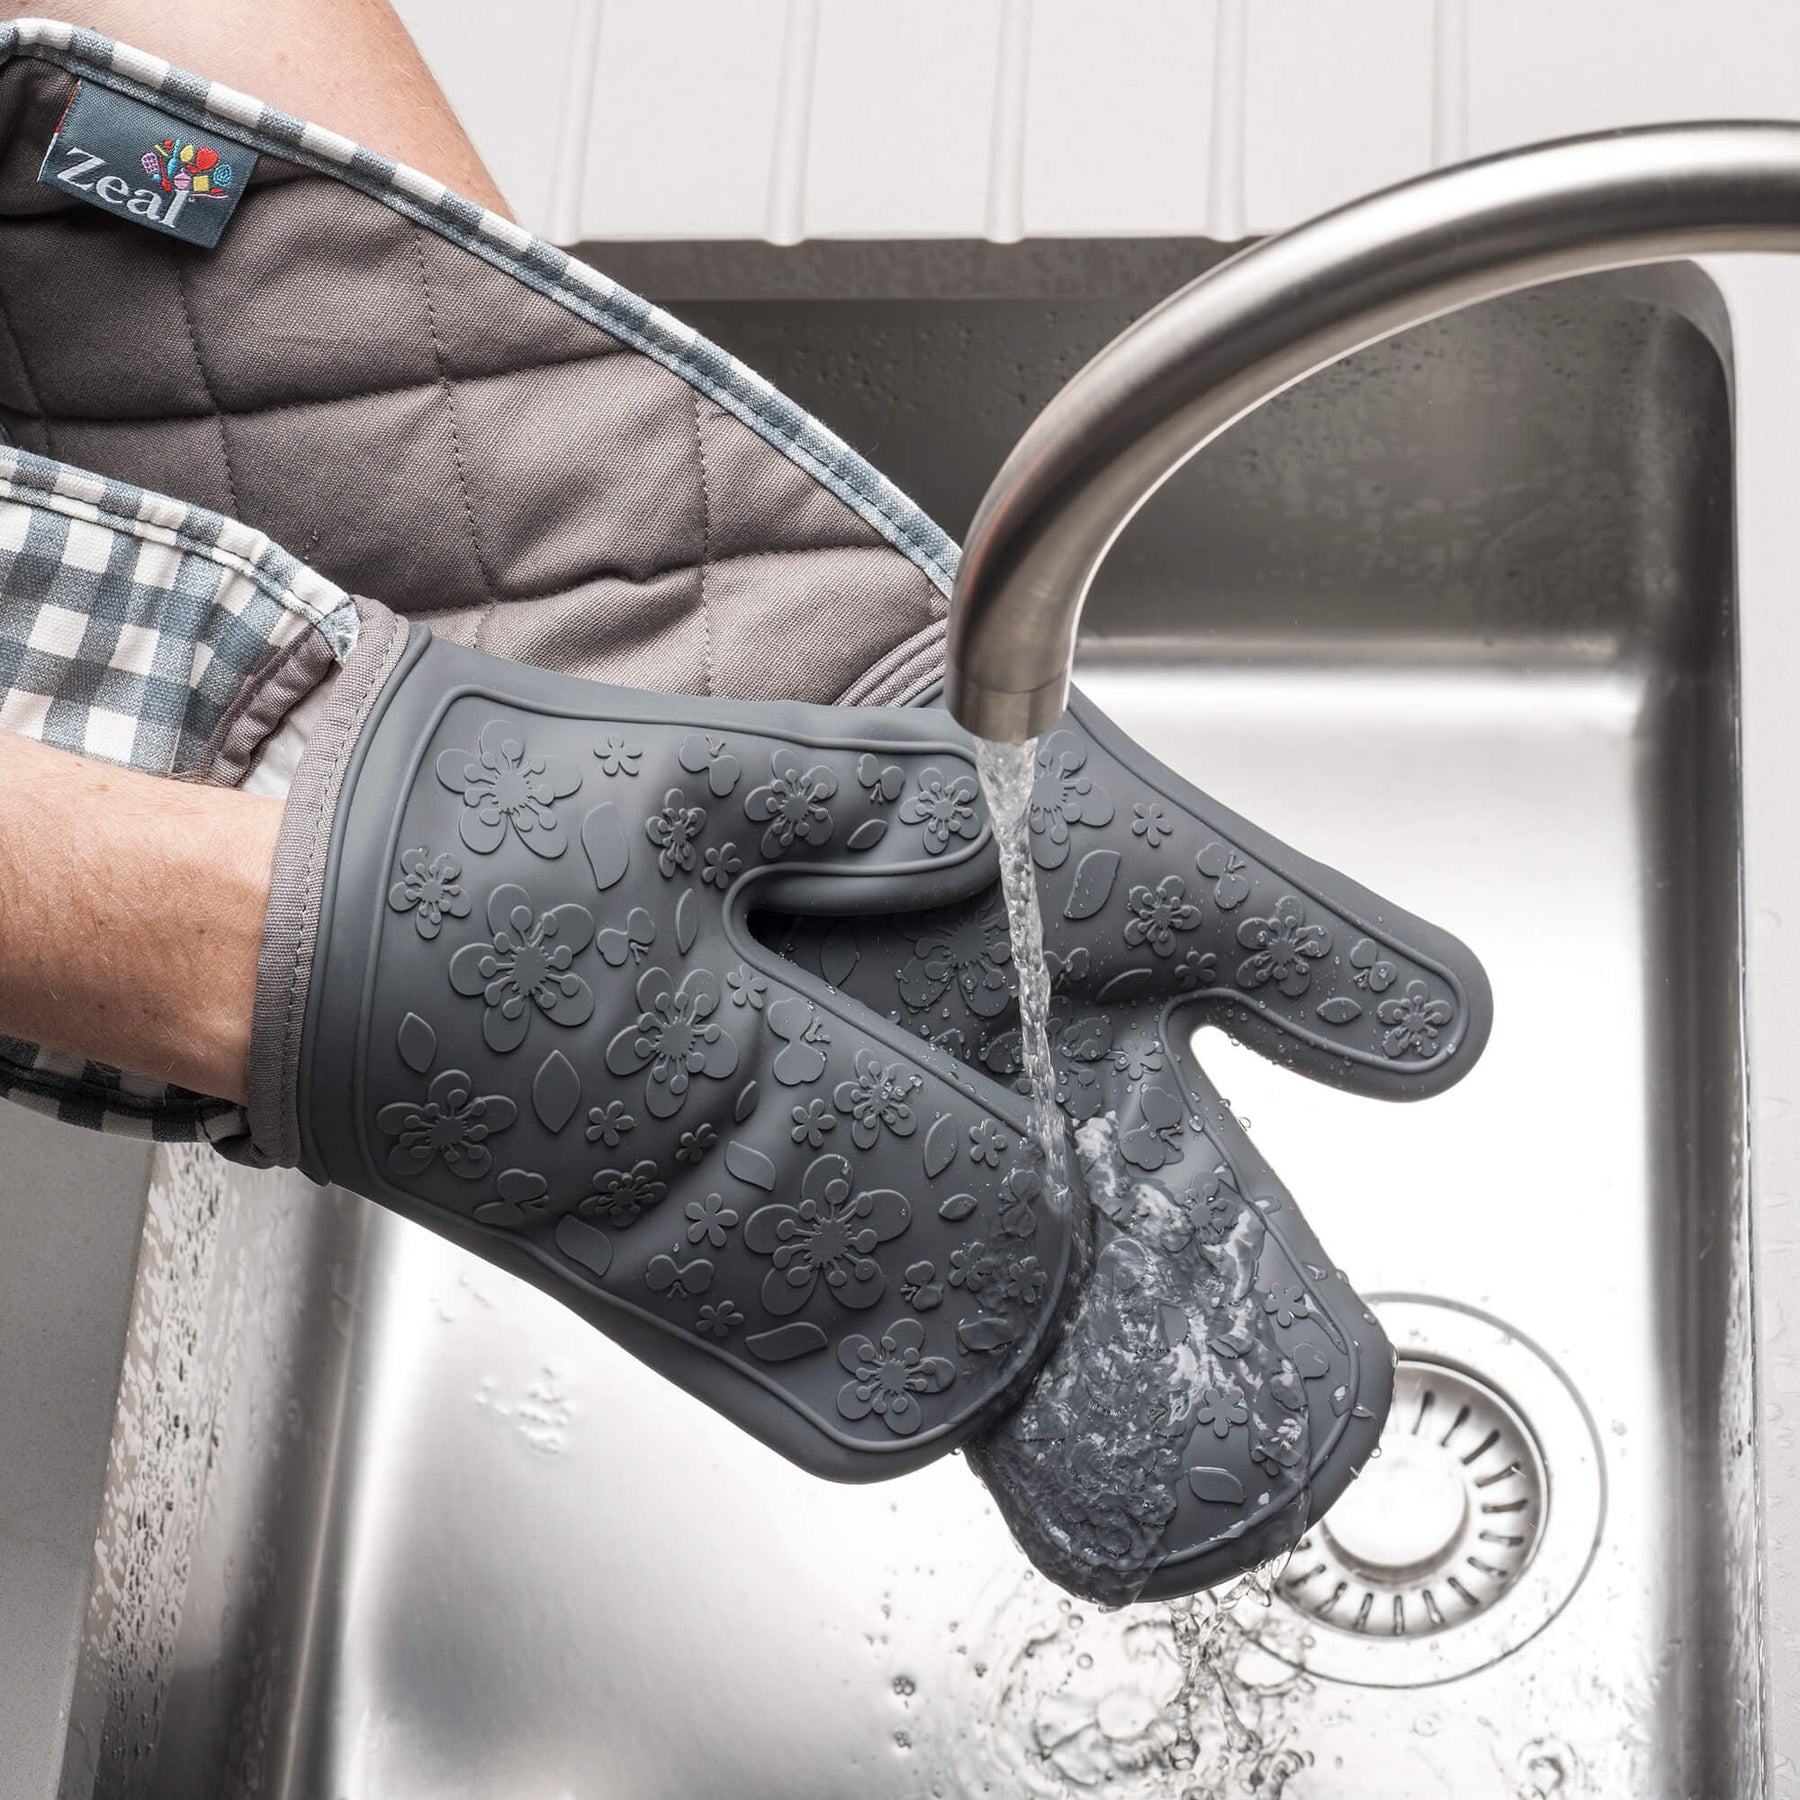 Steam Stop™ Waterproof Silicone Double Oven Glove